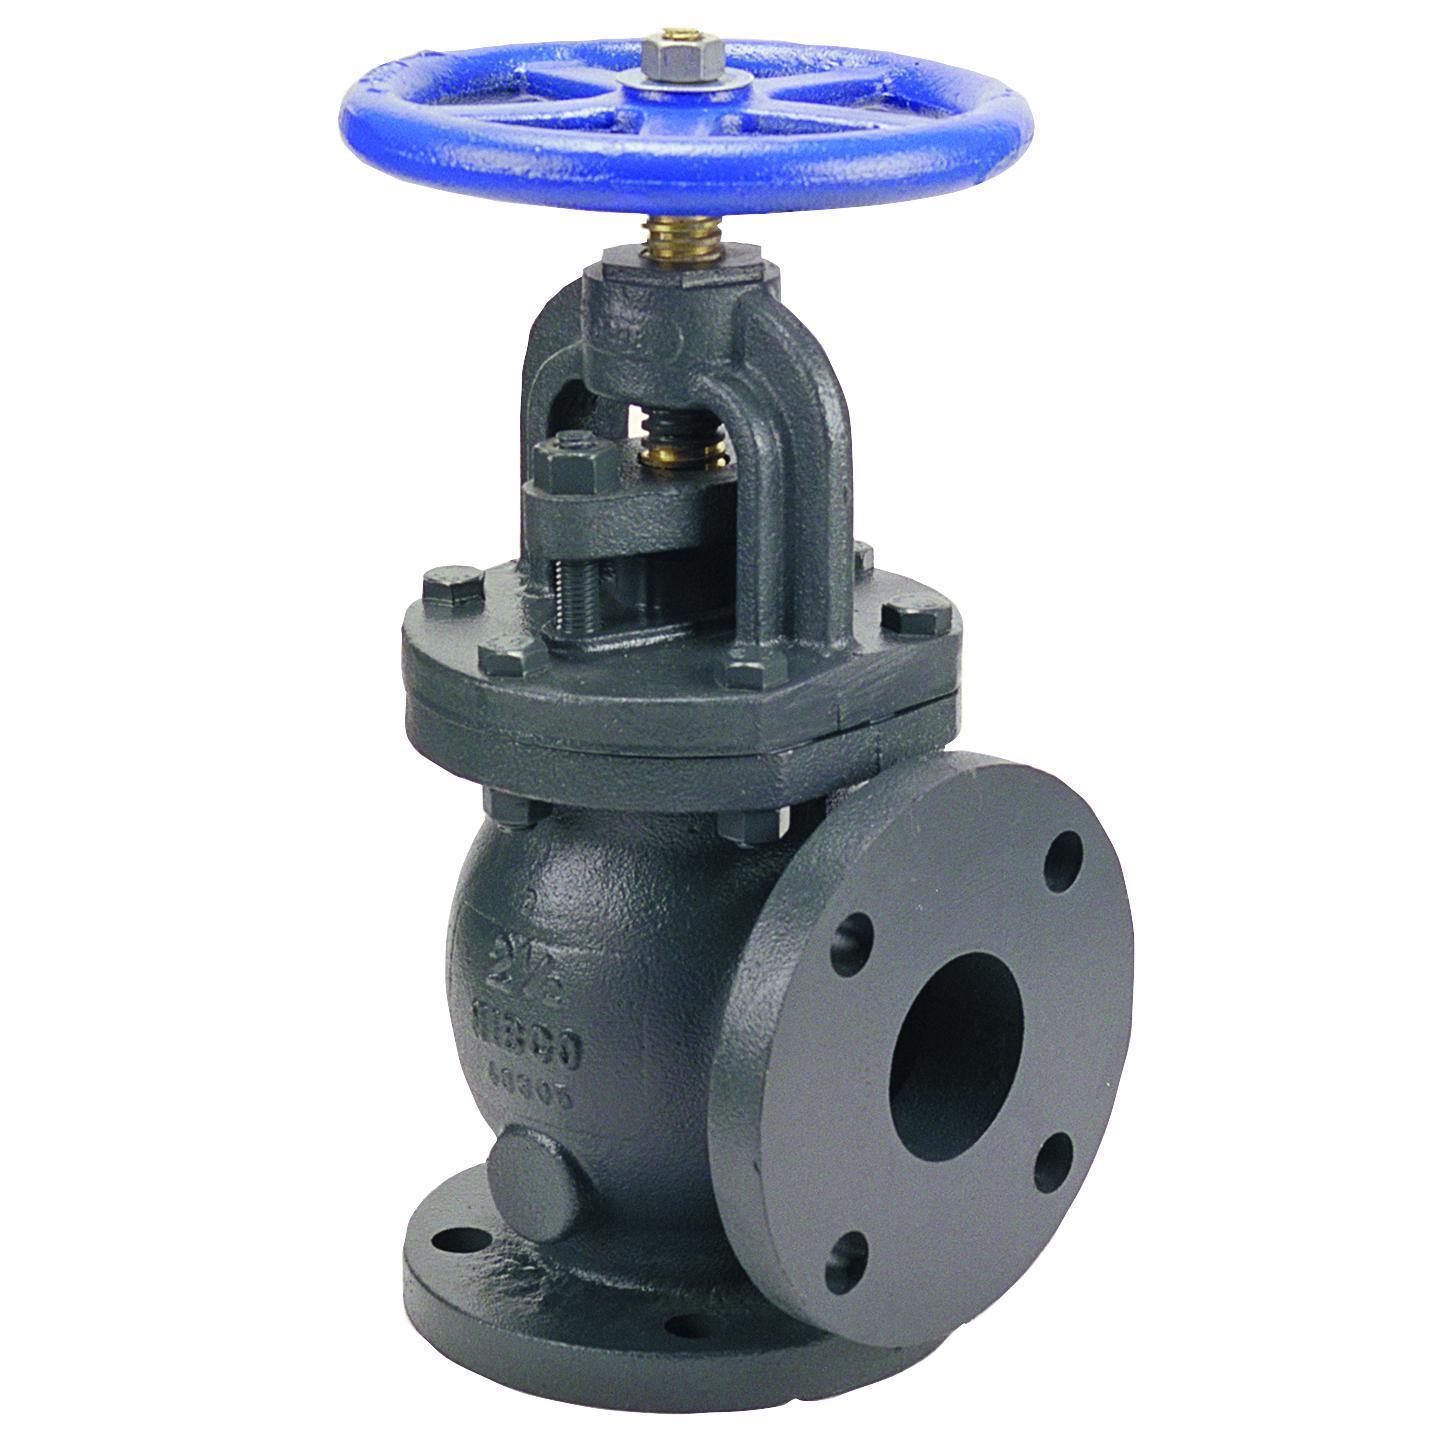 NIBCO® NHD300E F-818-B Angle Valve, 2-1/2 in Nominal, Flanged End Style, 125 lb, Cast Iron Body, Handwheel Actuator, Domestic